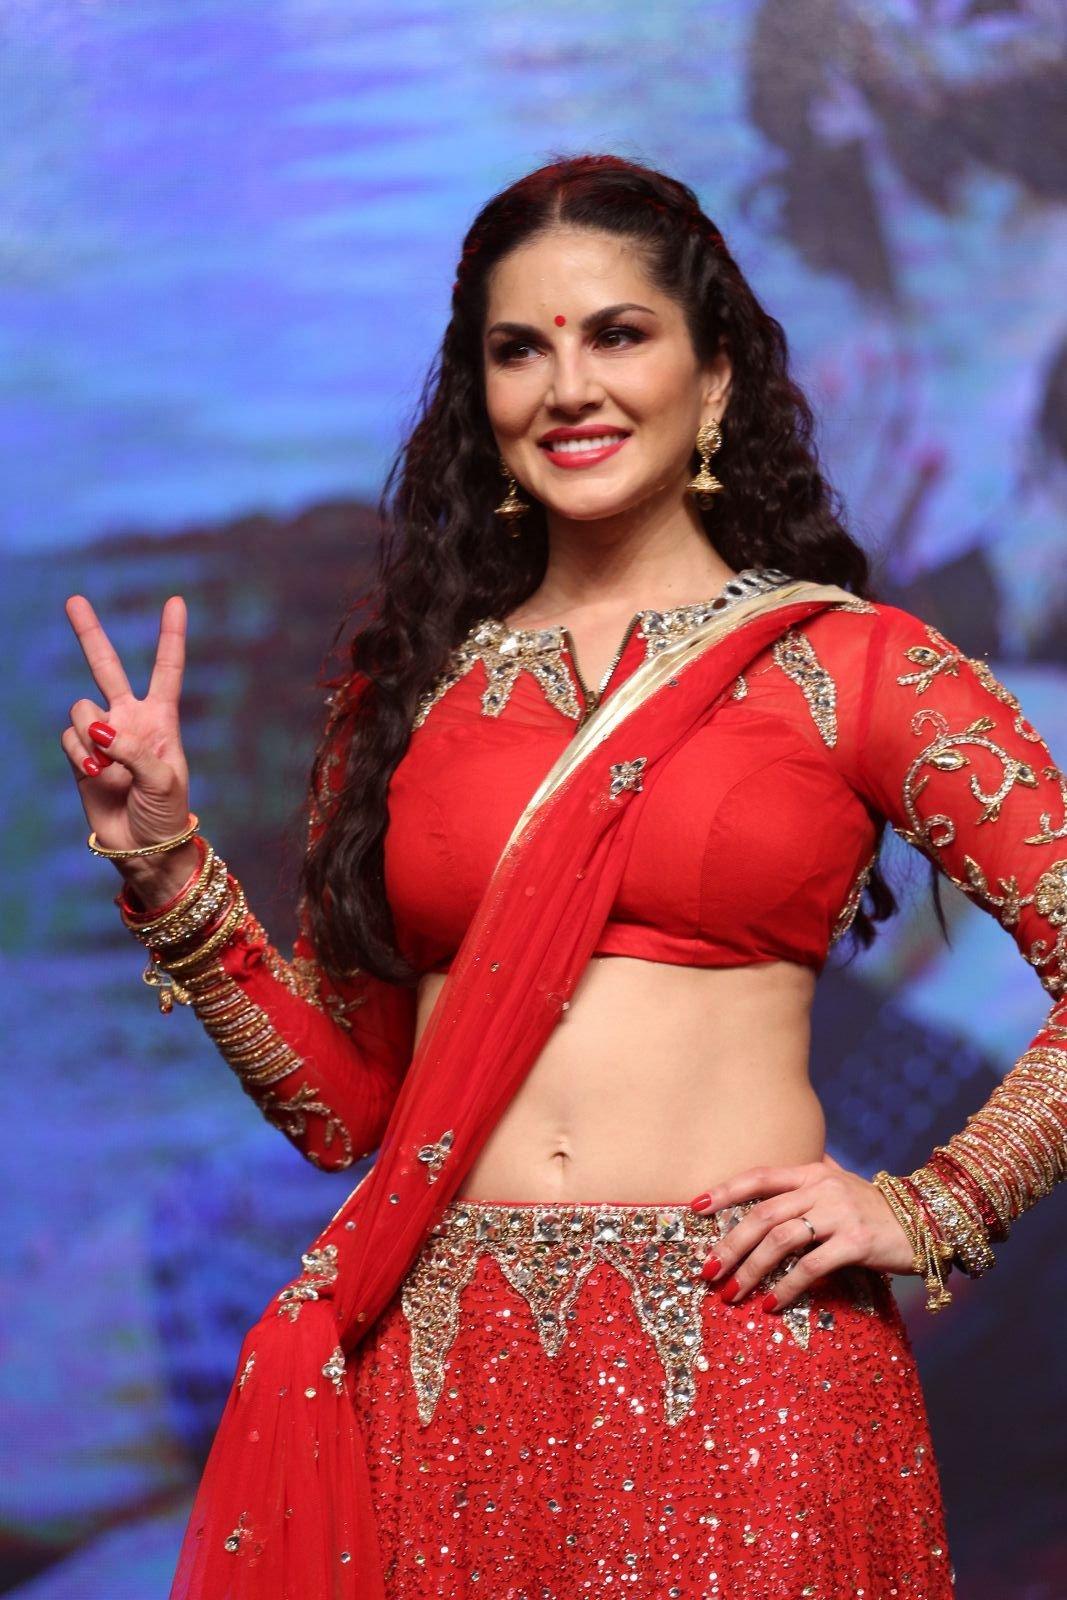 Sex Telugu Hot Sunny - Sunny Leone Looks Super Sexy In a Red Revealing Dress At Telugu Film  Ã¢â‚¬Å“RogueÃ¢â‚¬ Audio Launch Event in Hyderabad Gallery - Sunny Leone Celebs  Profile - Add Sunny Leone Pics to Facebook,Download